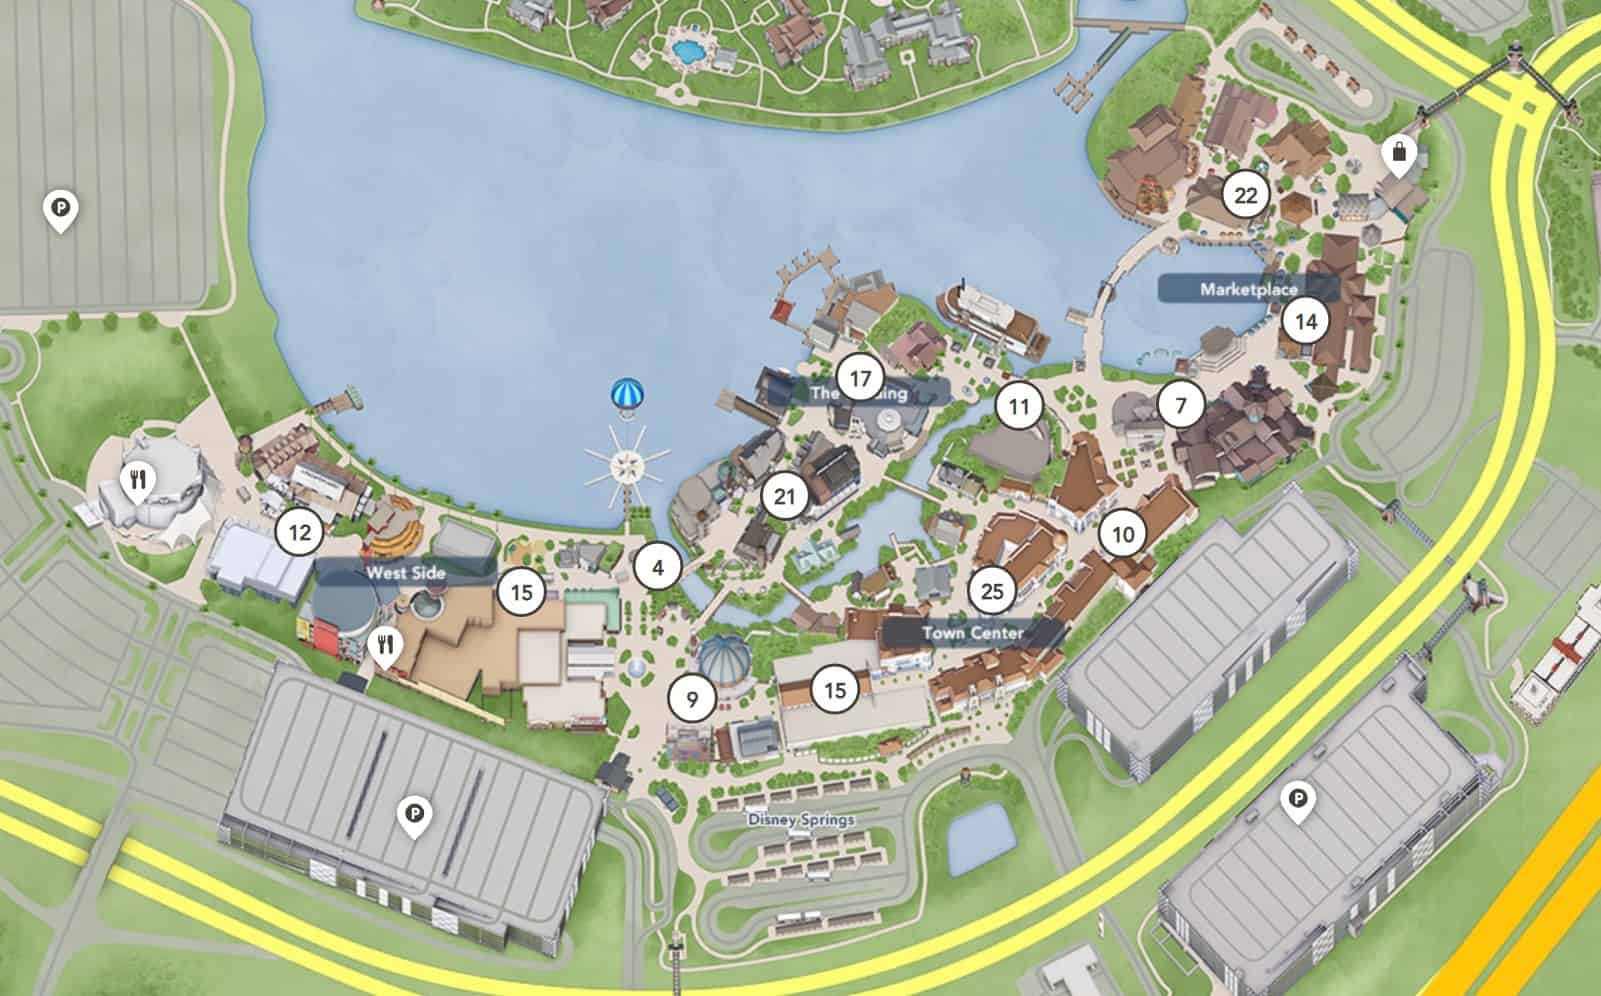 Your guide to Disney Springs in 2023 (with videos) - Samir's Virtual World